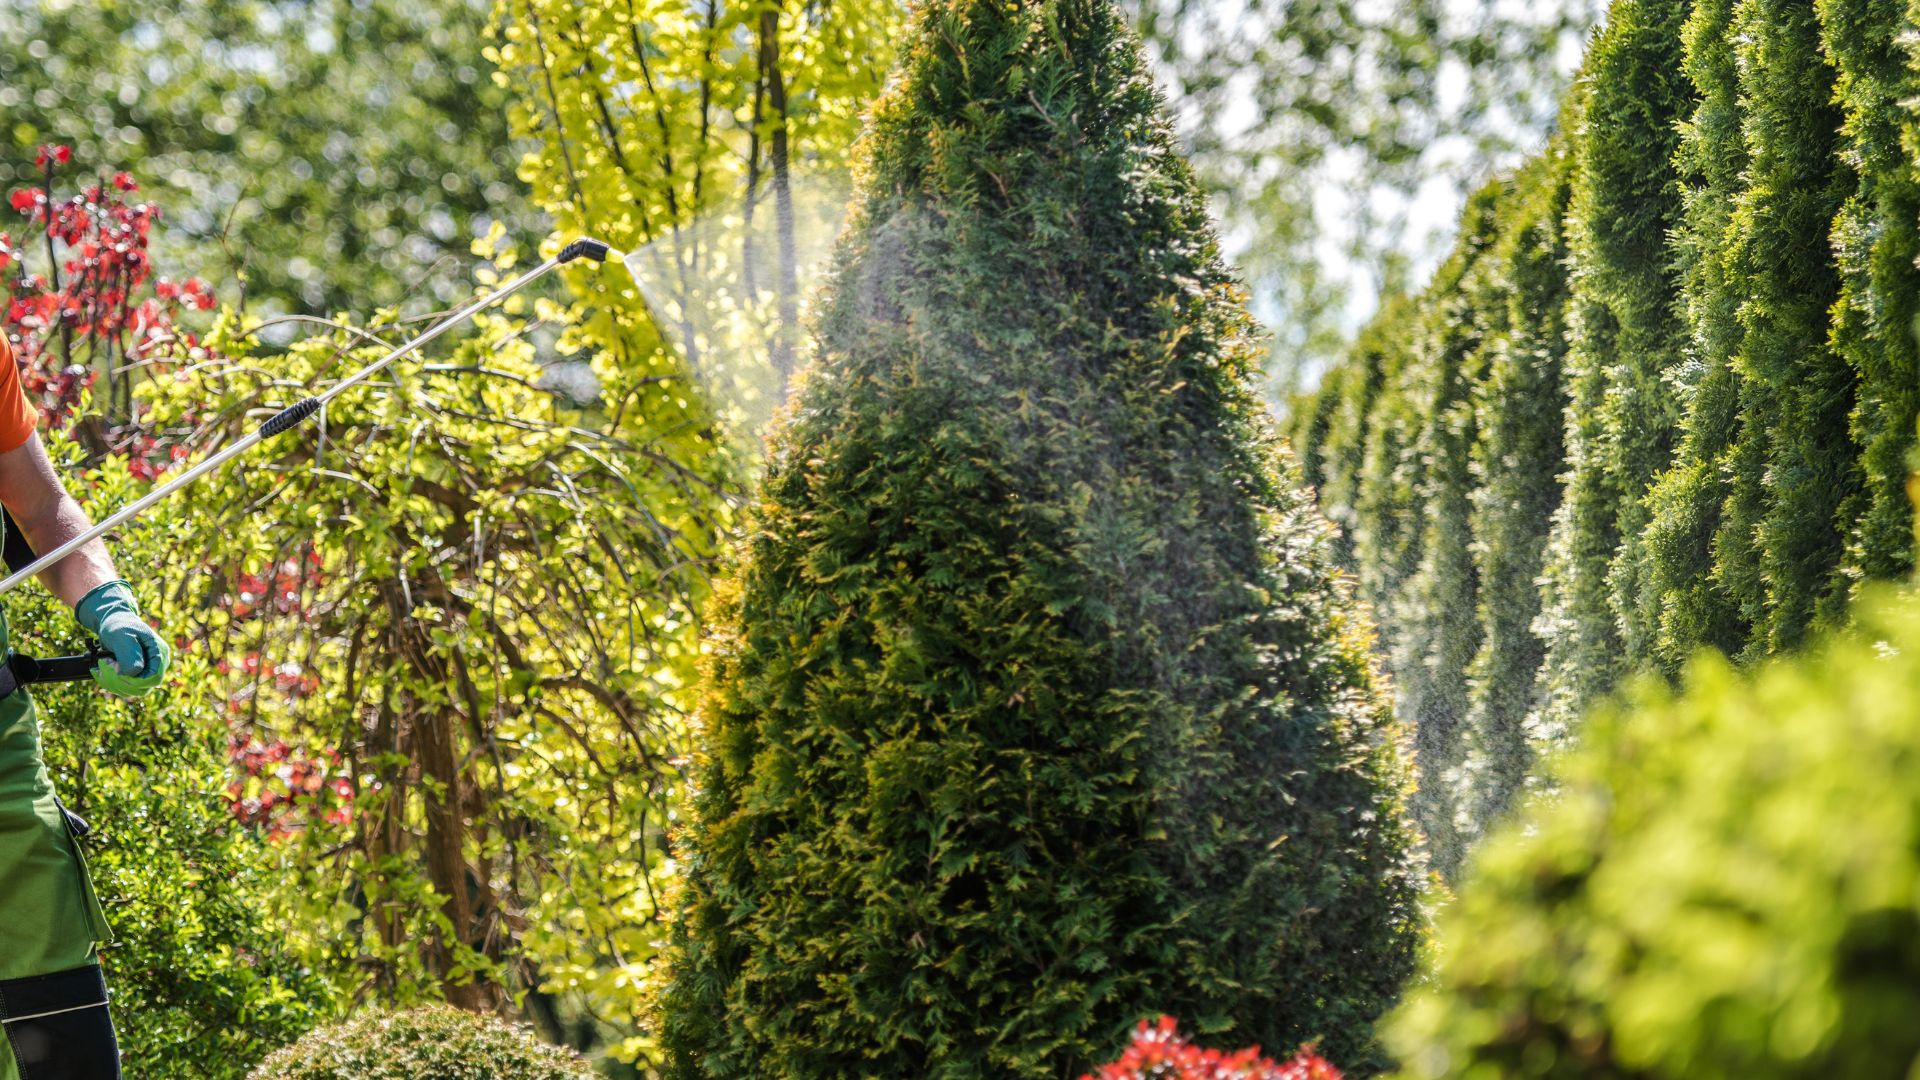 An image of a person spraying bushes in their yard with residual insecticide for mosquitoes.